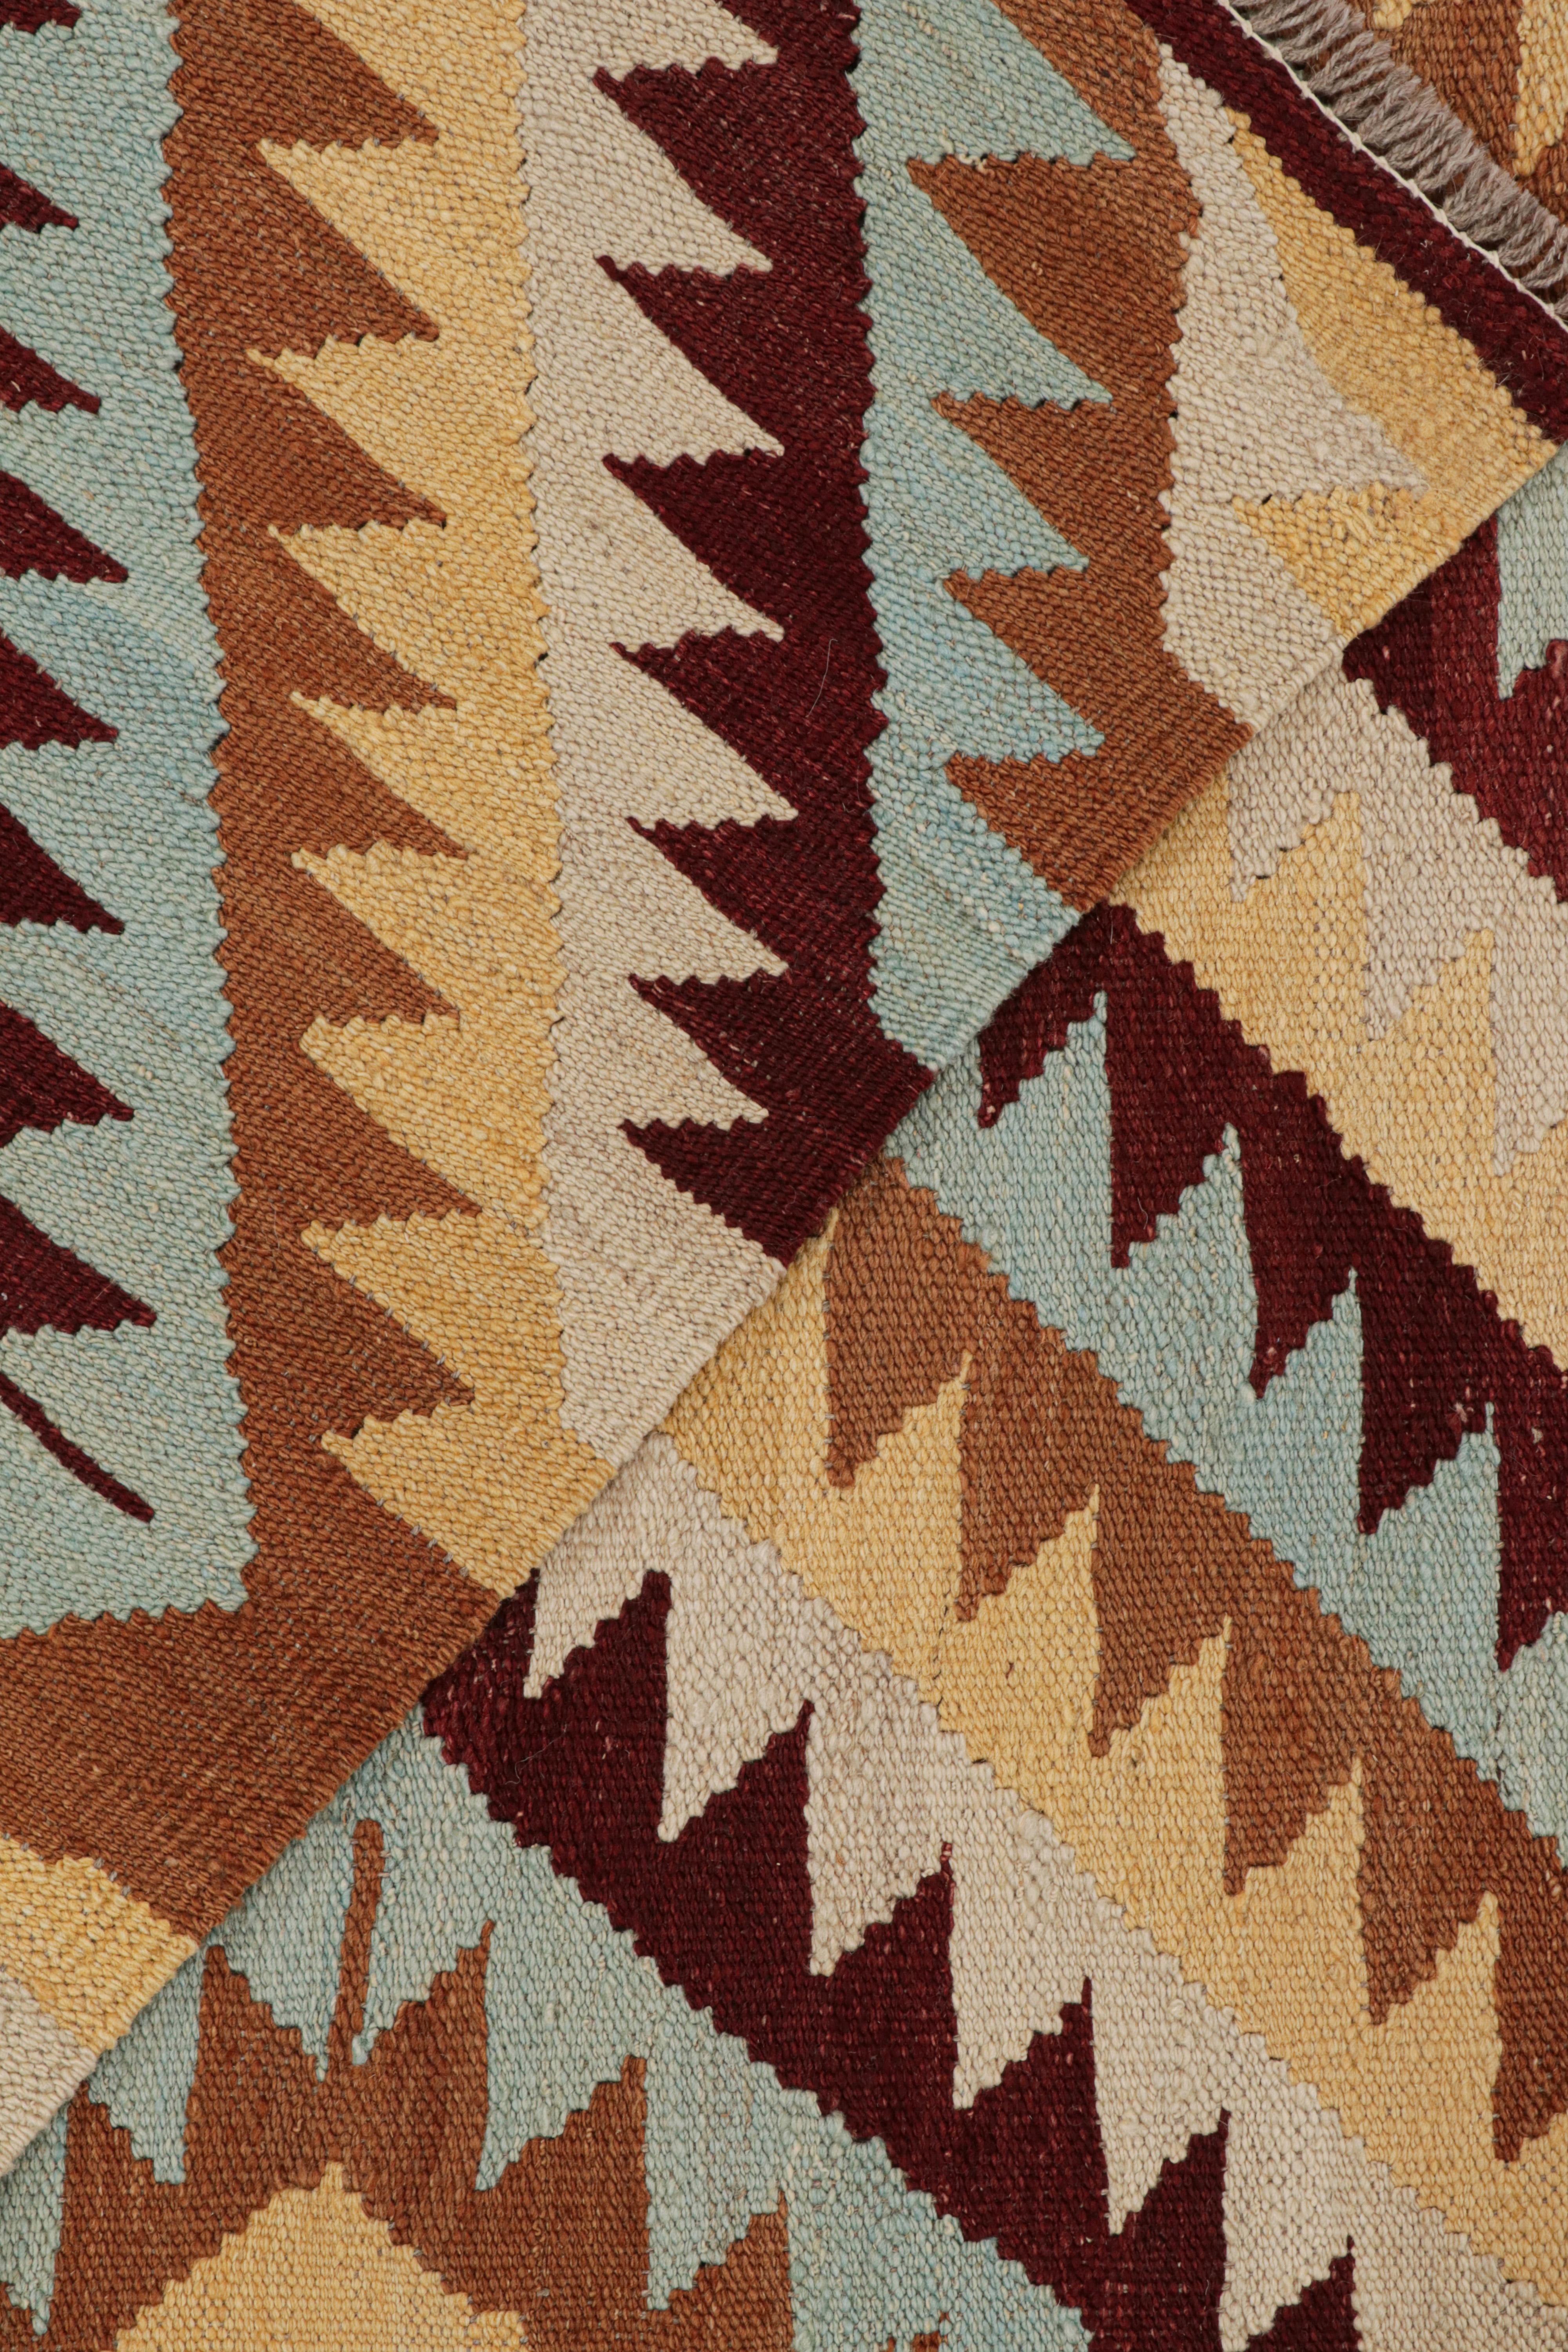 Wool Rug & Kilim’s Tribal Style Kilim in Red, Blue and Beige-Brown Geometric Patterns For Sale